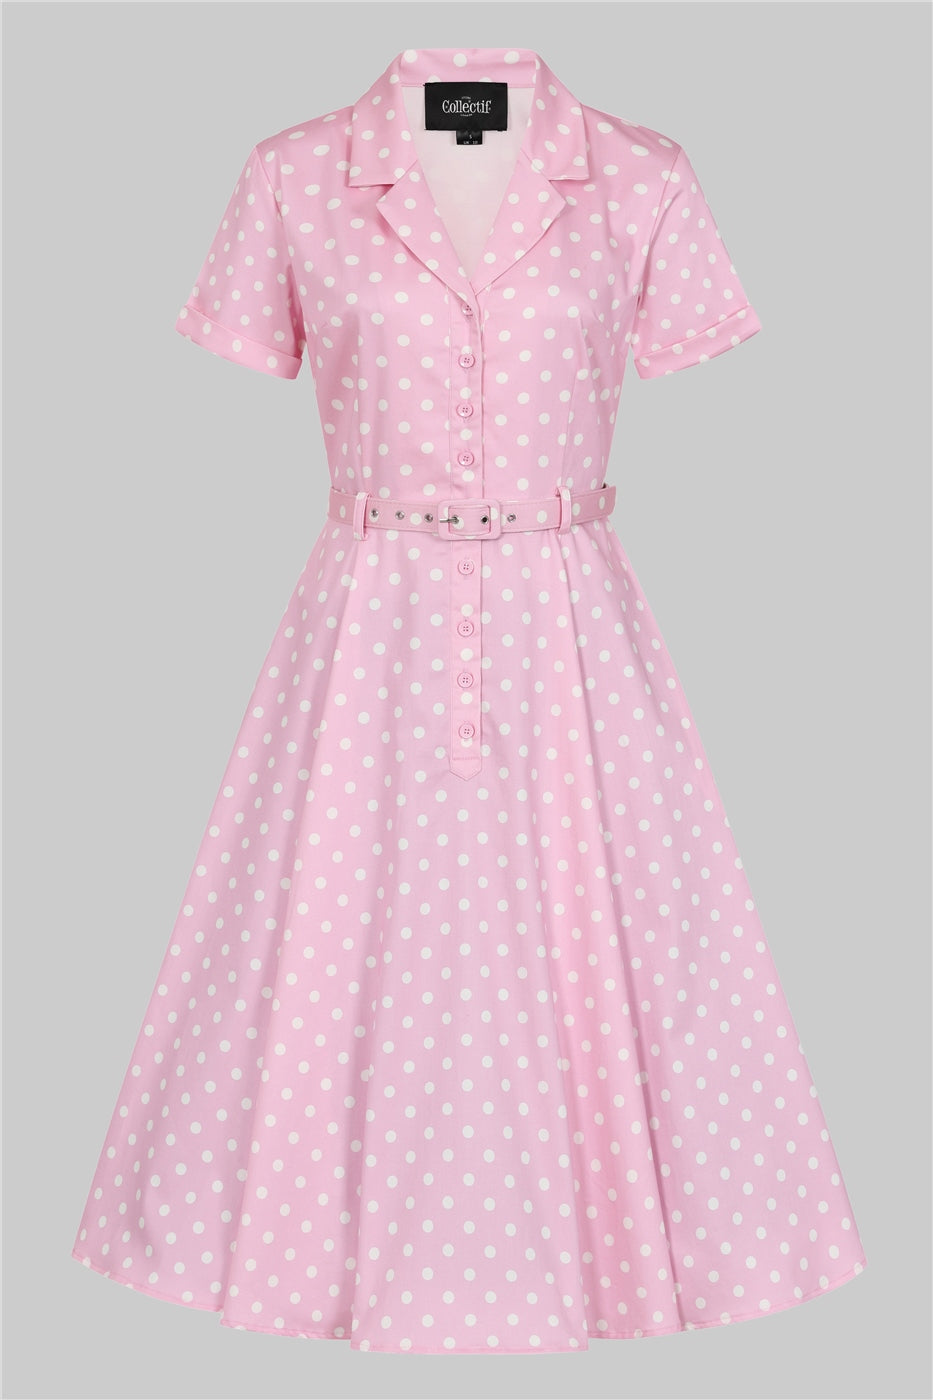 1950s "Caterina" shirt dress by Collectif in a brand new pink and white polka dot print with a matching belt.